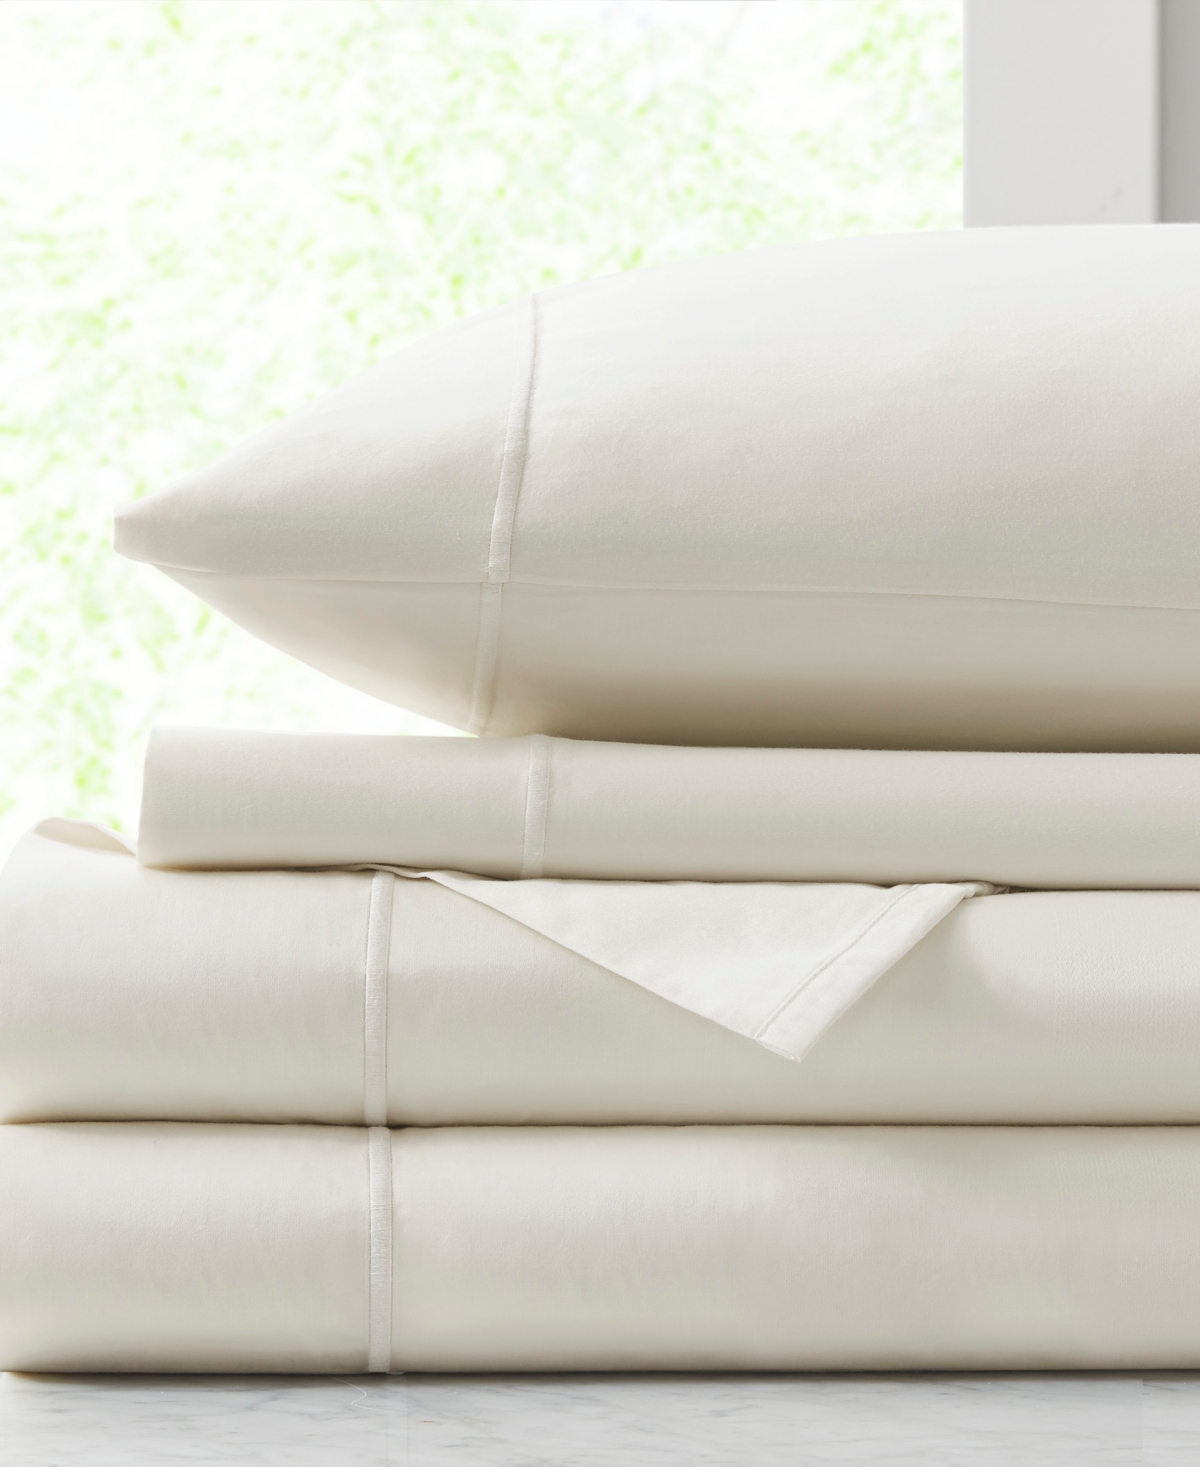 Croscill 500 Thread Count Egyptian Cotton 4-pc Sheet Set, Queen In Ivory